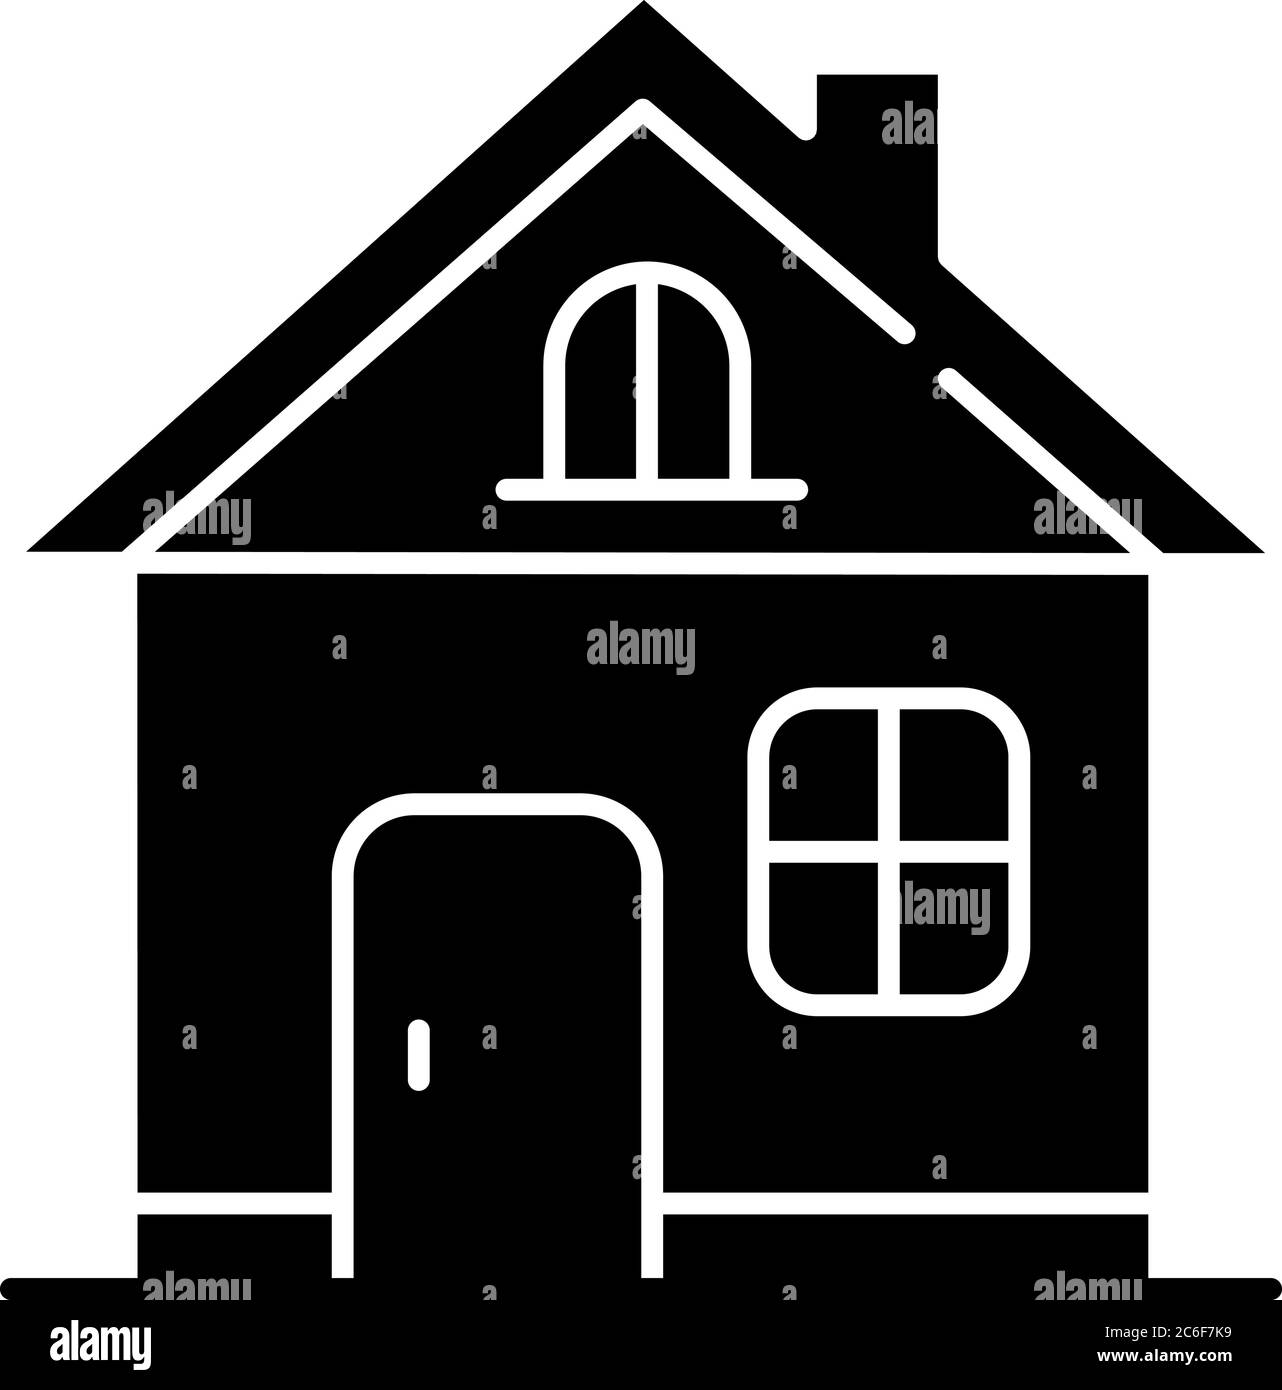 Home black glyph icon. House improvement. Real estate. Private property. Cottage for family dwelling. Building construction. Silhouette symbol on whit Stock Vector